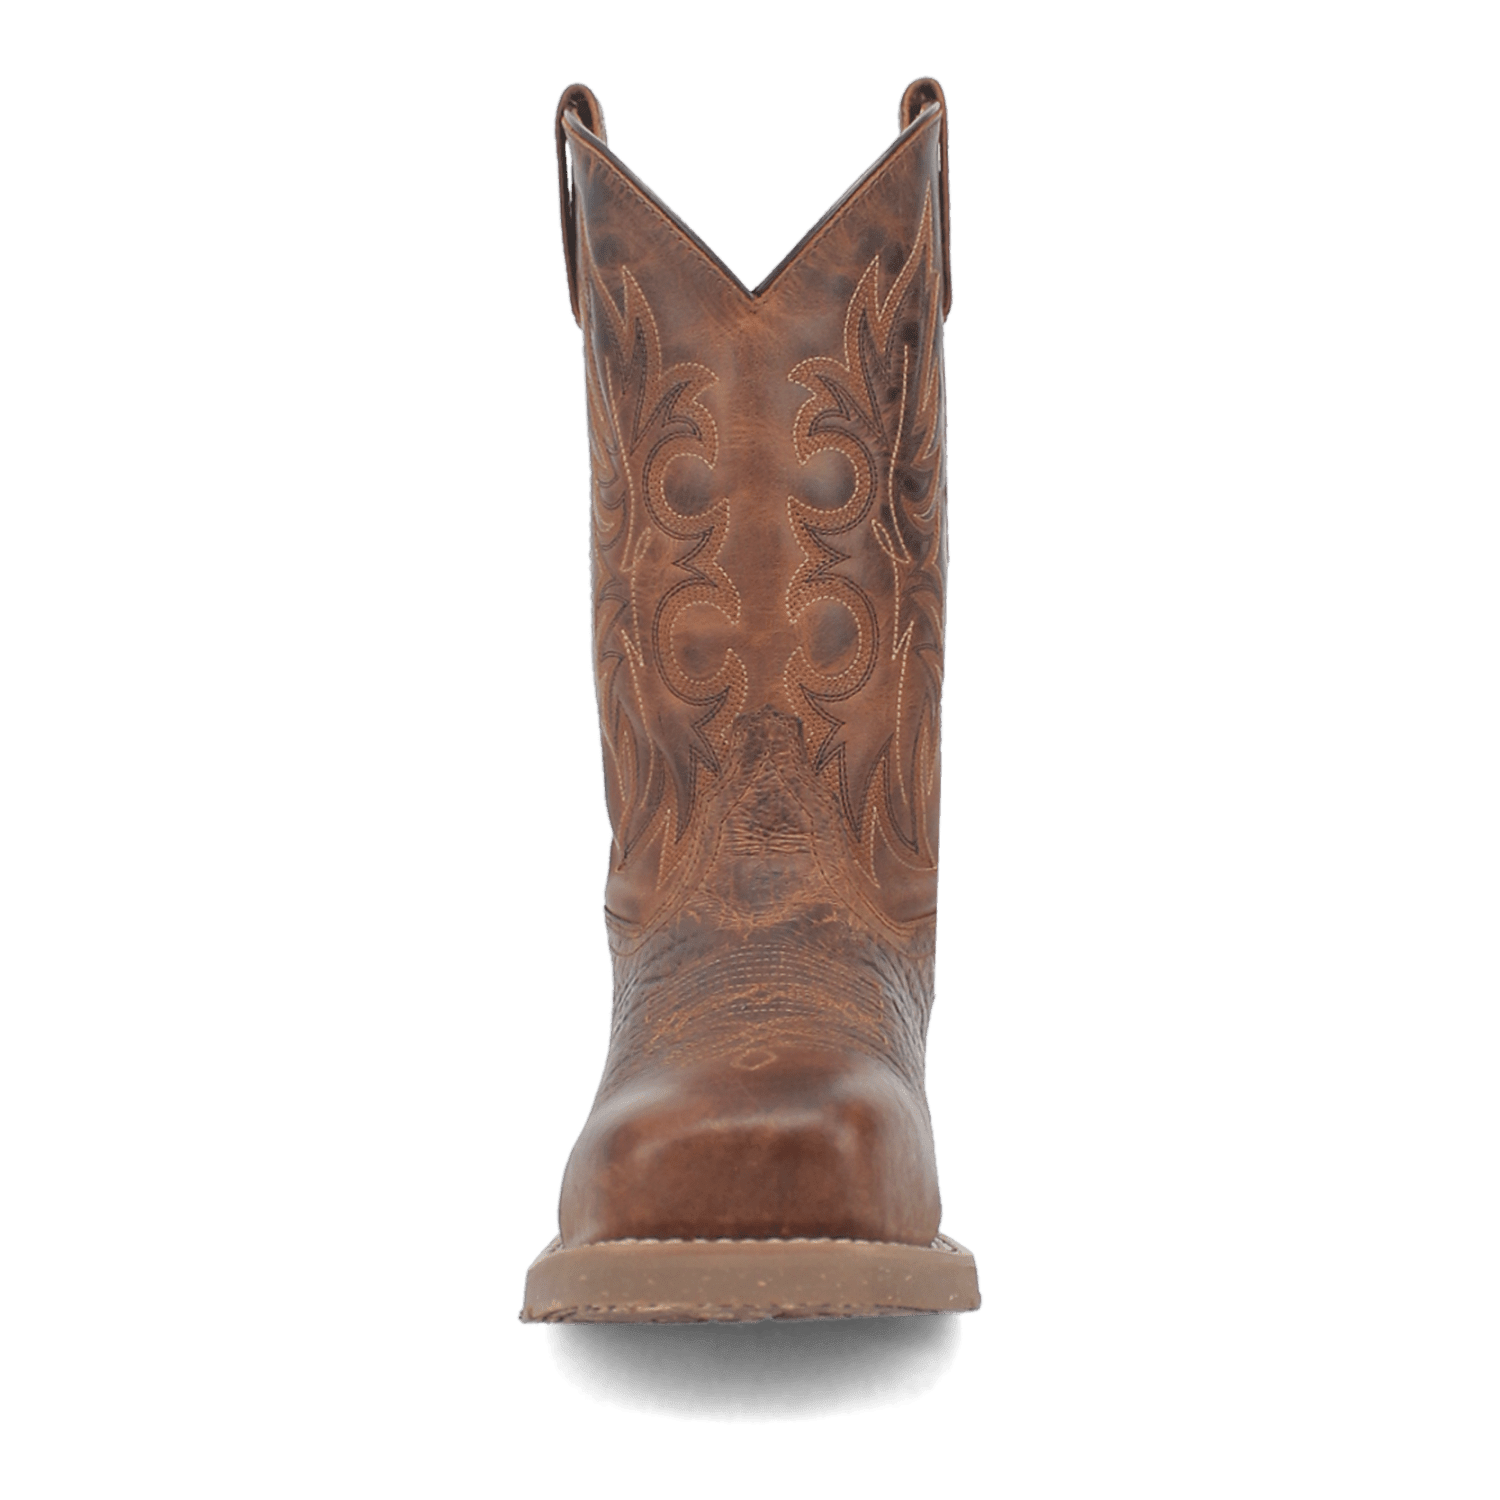 DURANT STEEL TOE LEATHER BOOT Image